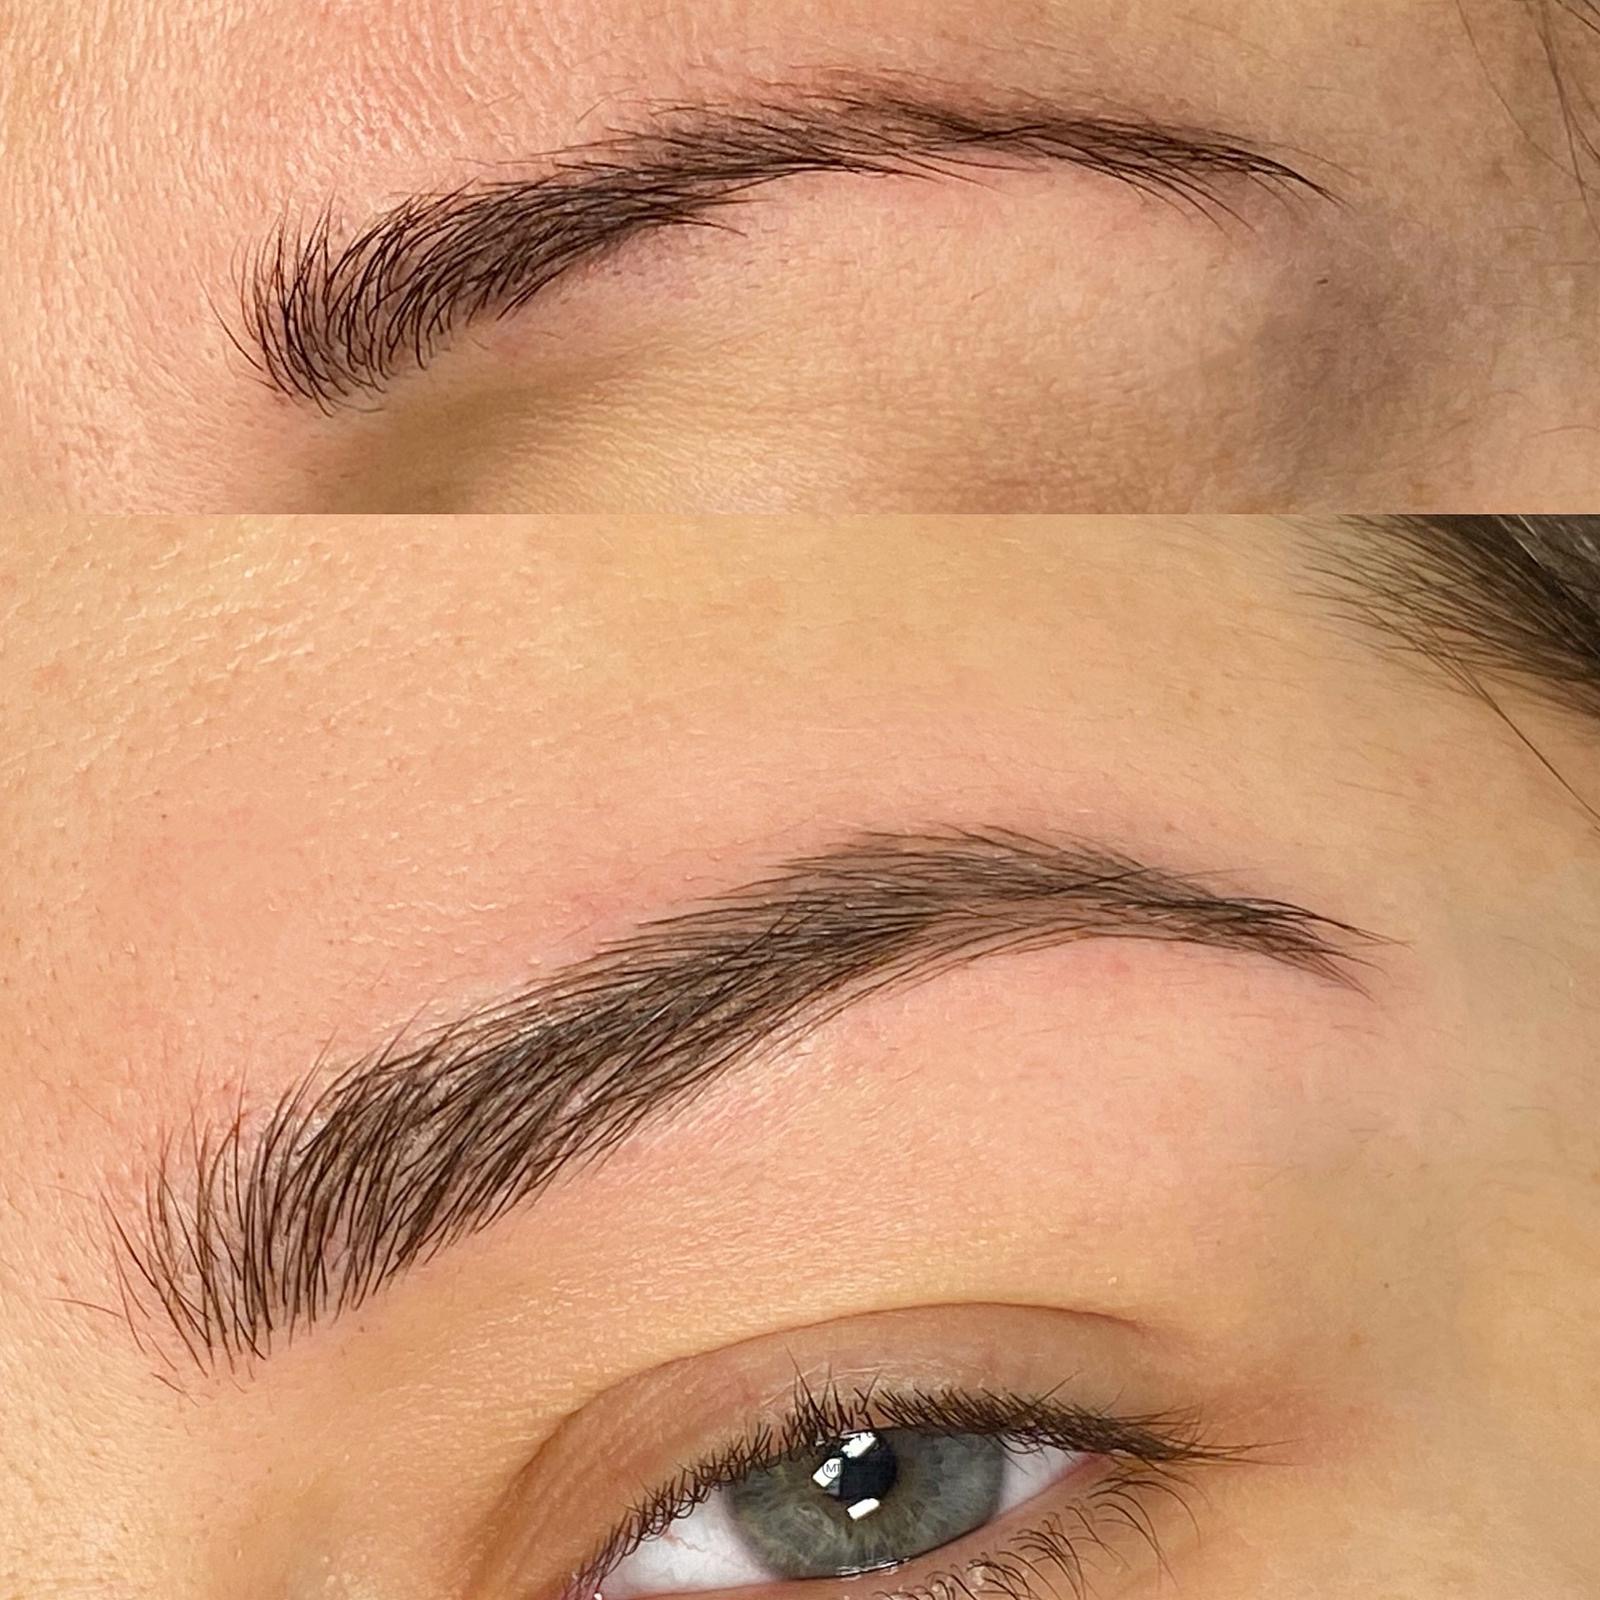 This image shows a woman's eyebrows meticulously done.